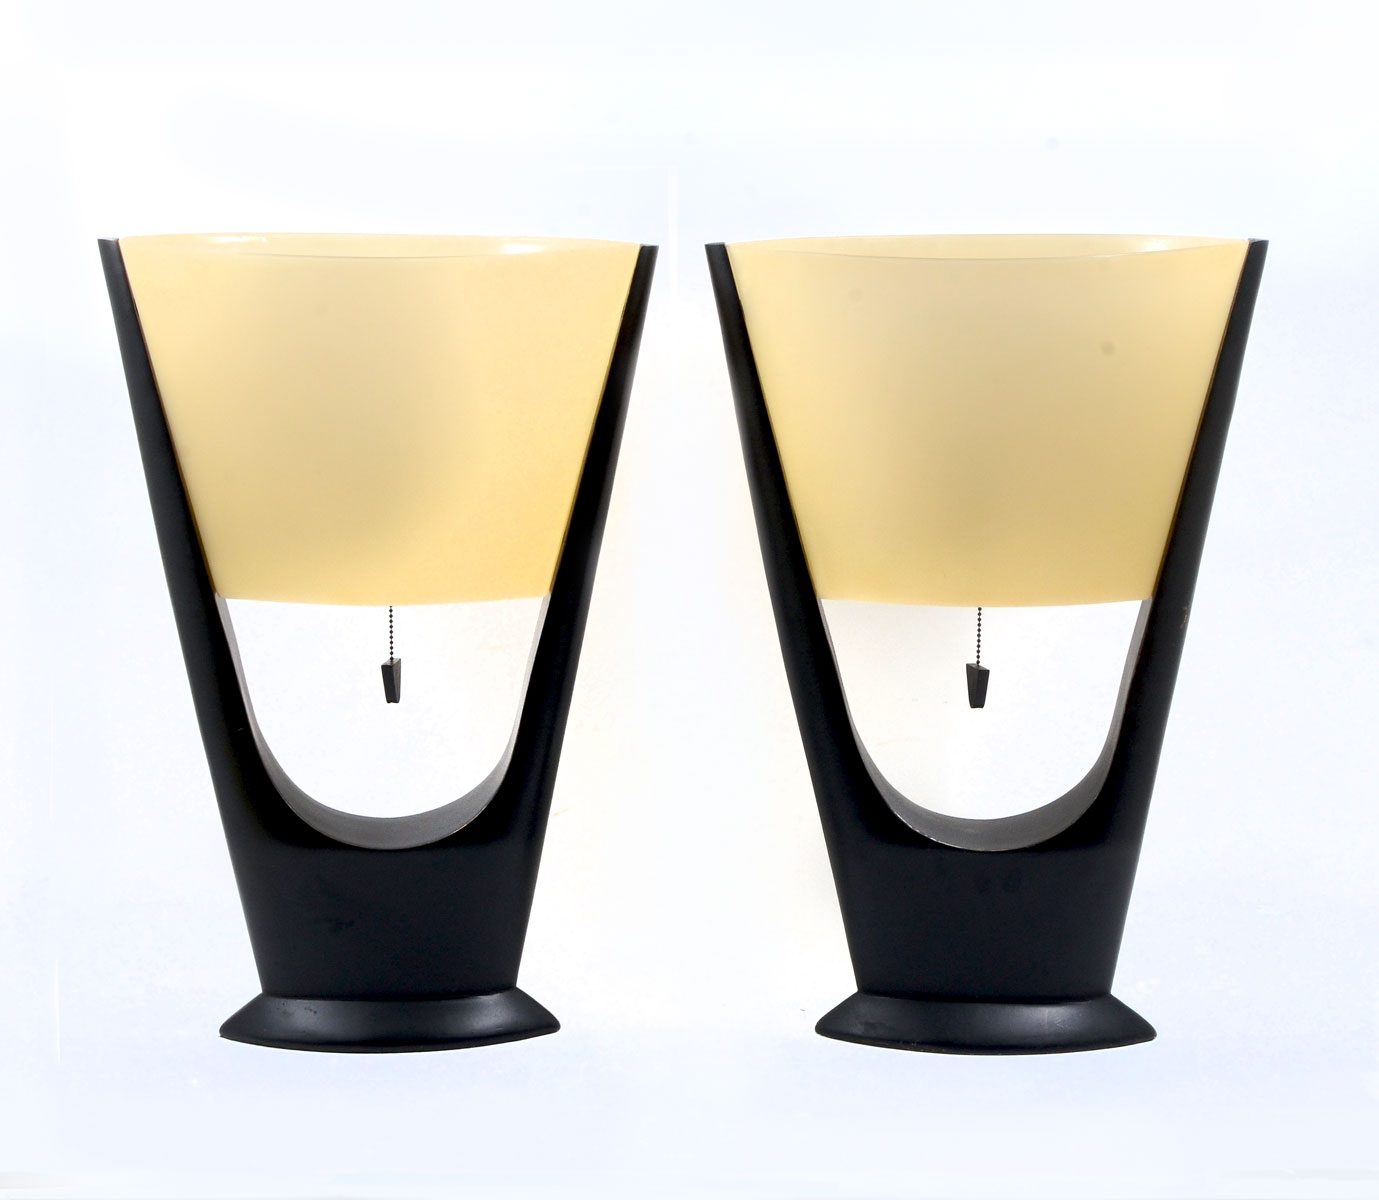 2 MODERN TABLE LAMPS: Pair of single